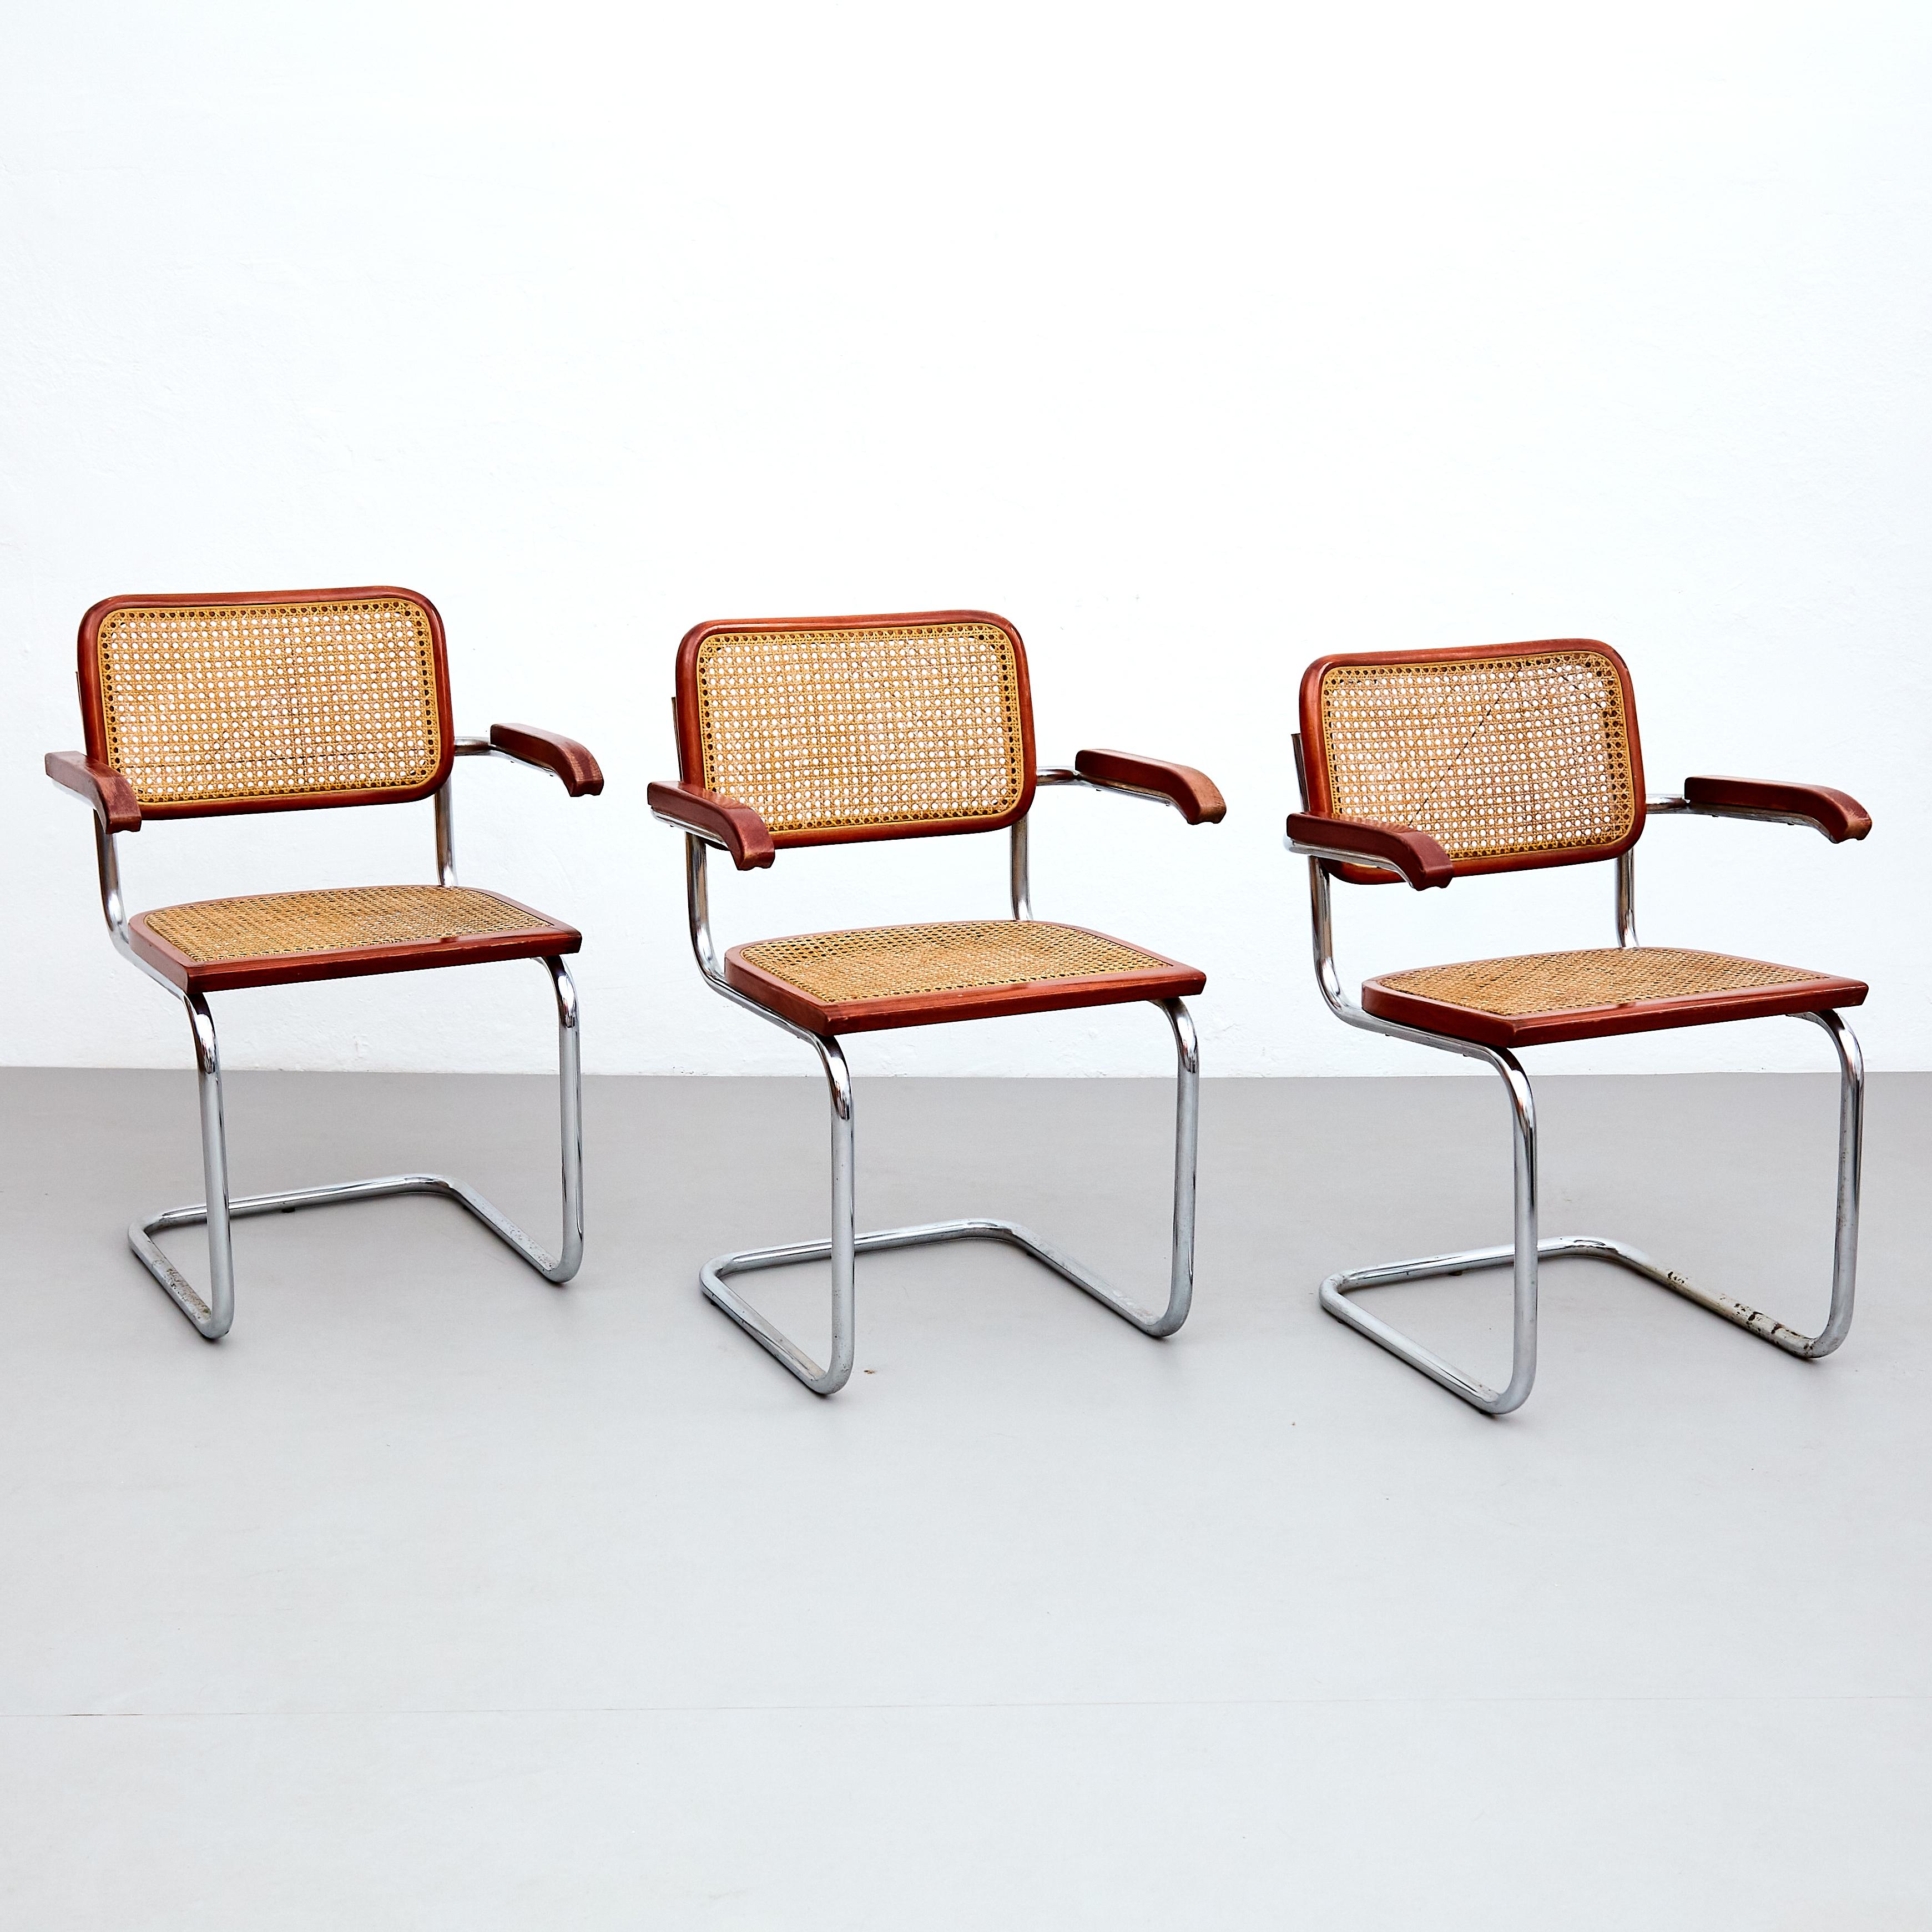 Italian Set of 6 Cesca Chairs by Marcel Breuer, Mid-Century Modern Metal & Wood Classic For Sale